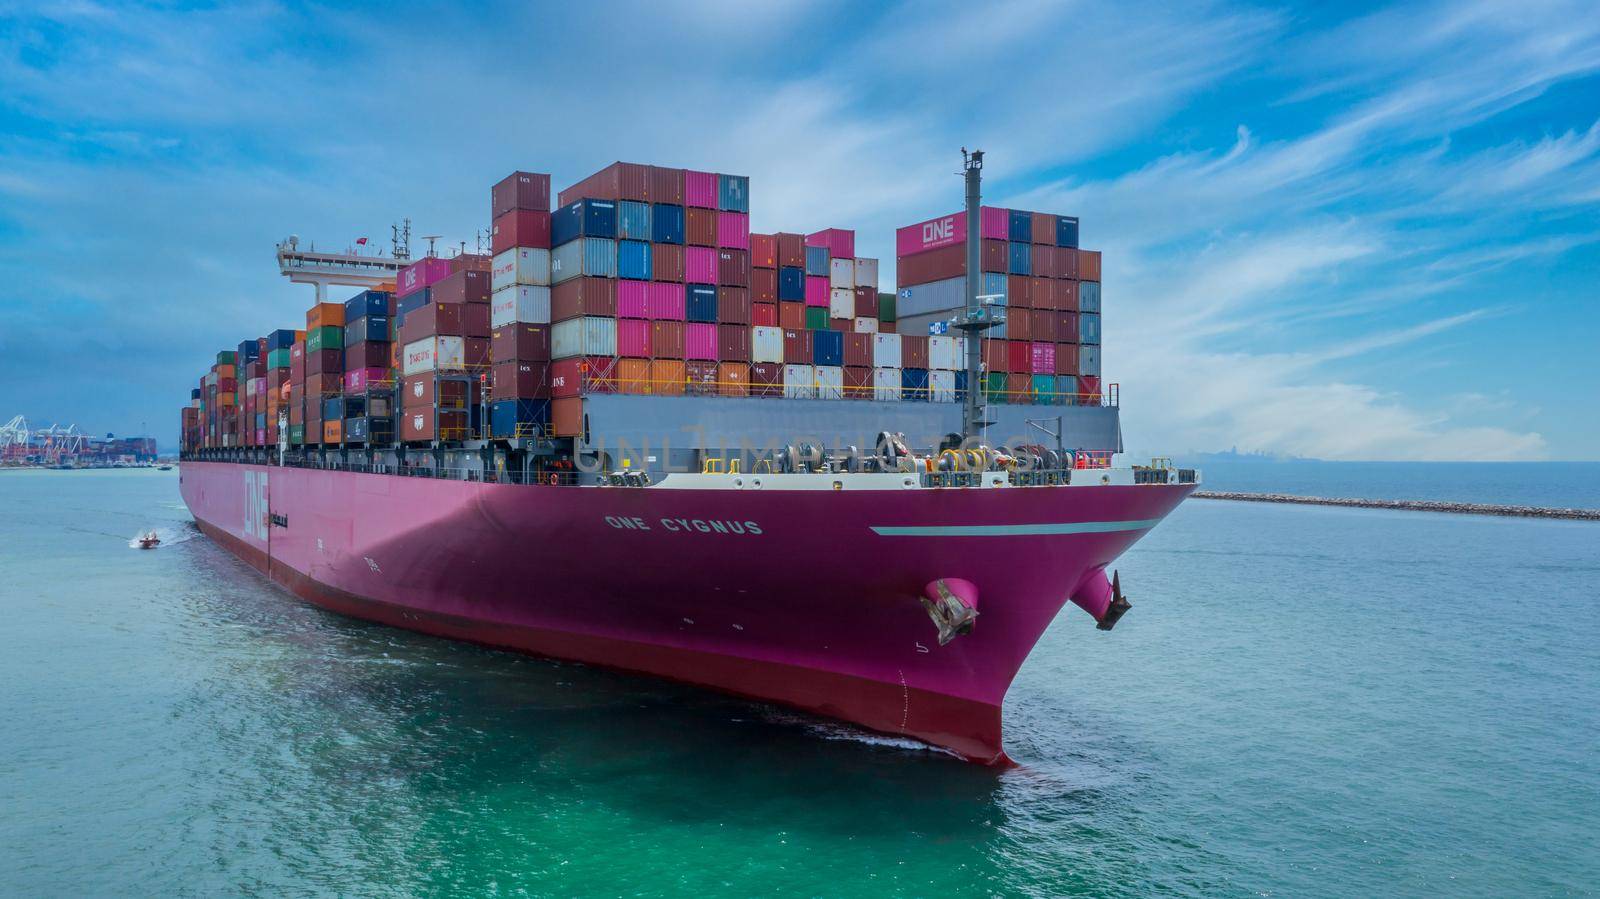 Global business company freight shipping logistics import export transportation by container ship, Container cargo ship at commercial industrial port freight transportation.